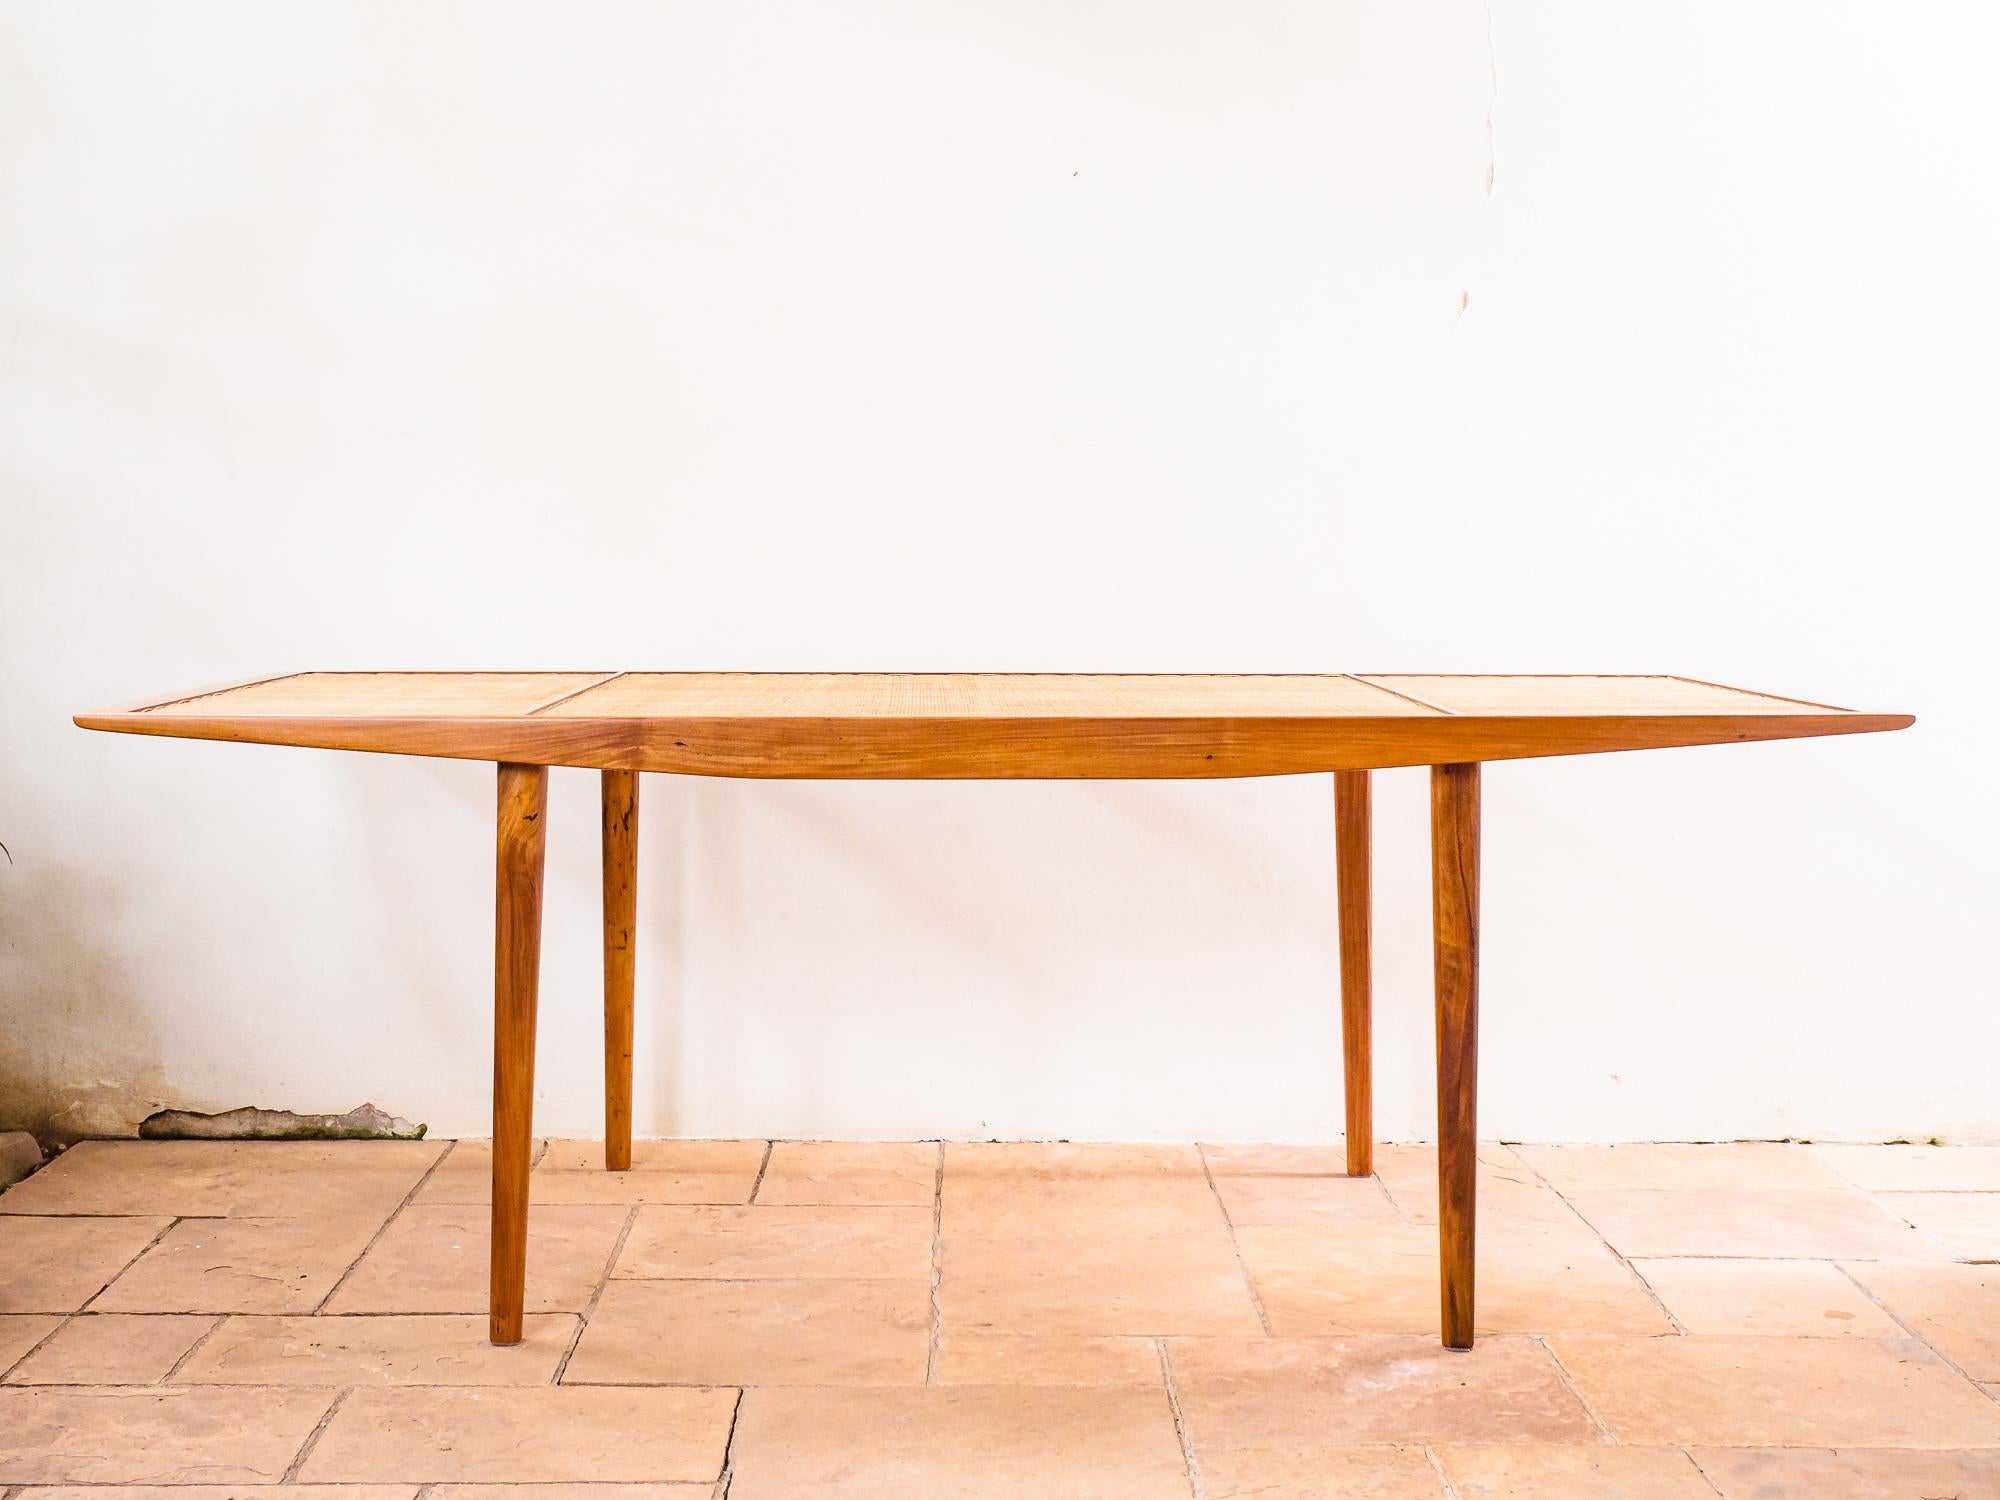 20th Century Dining Table in Caviuna and Cane Weaving by Martin Eisler, Brazil Modern, 1950s For Sale